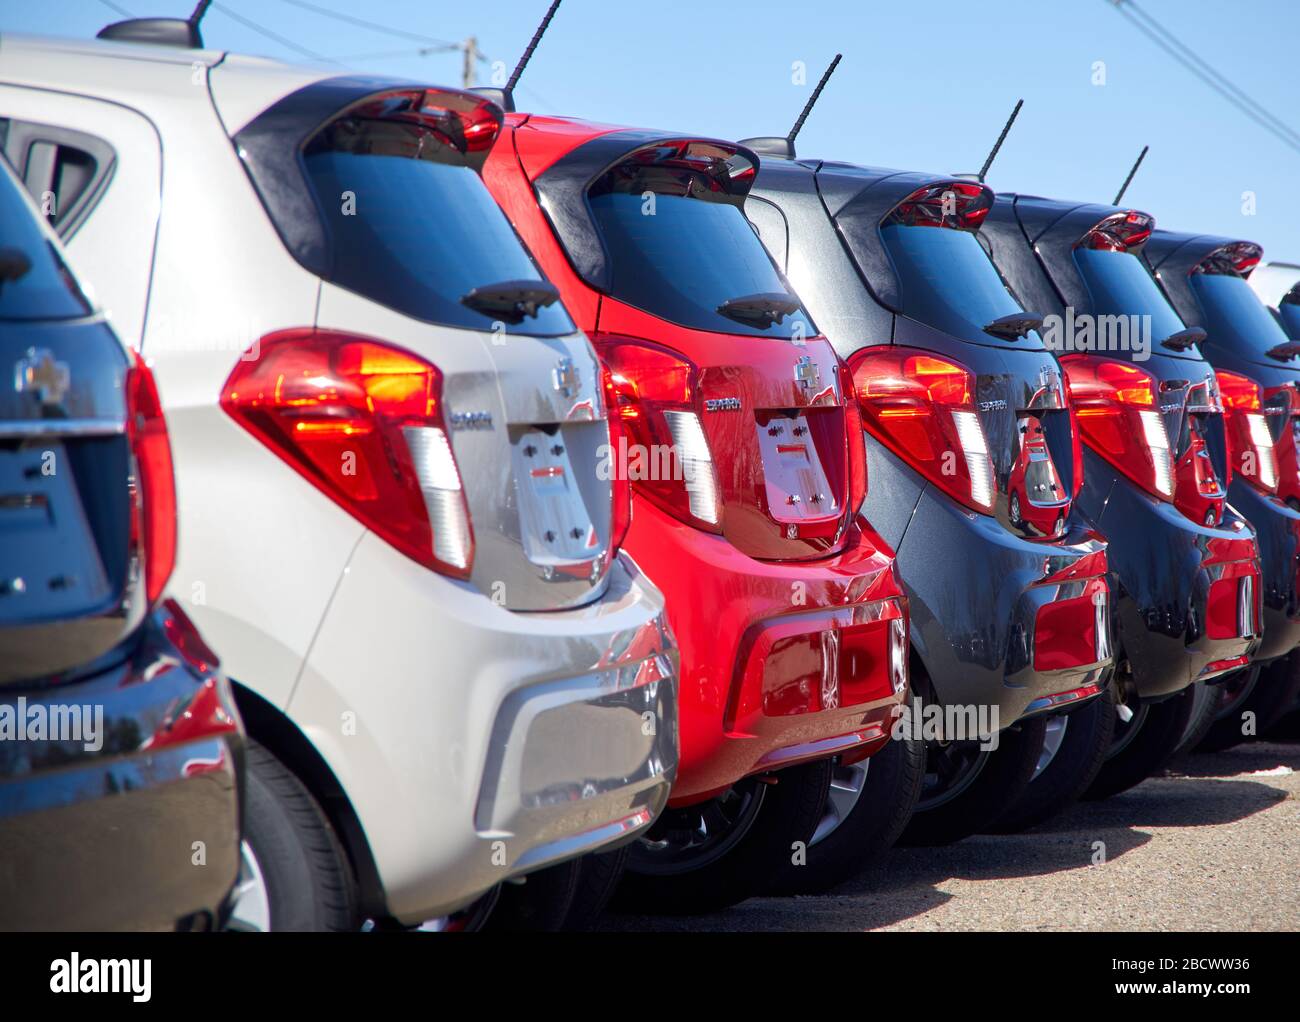 Montreal, Canada - April 4, 2020: Chevrolet Spark cars in a line. Chevrolet is one of the most popular and recognizable automotive brands in the US. C Stock Photo